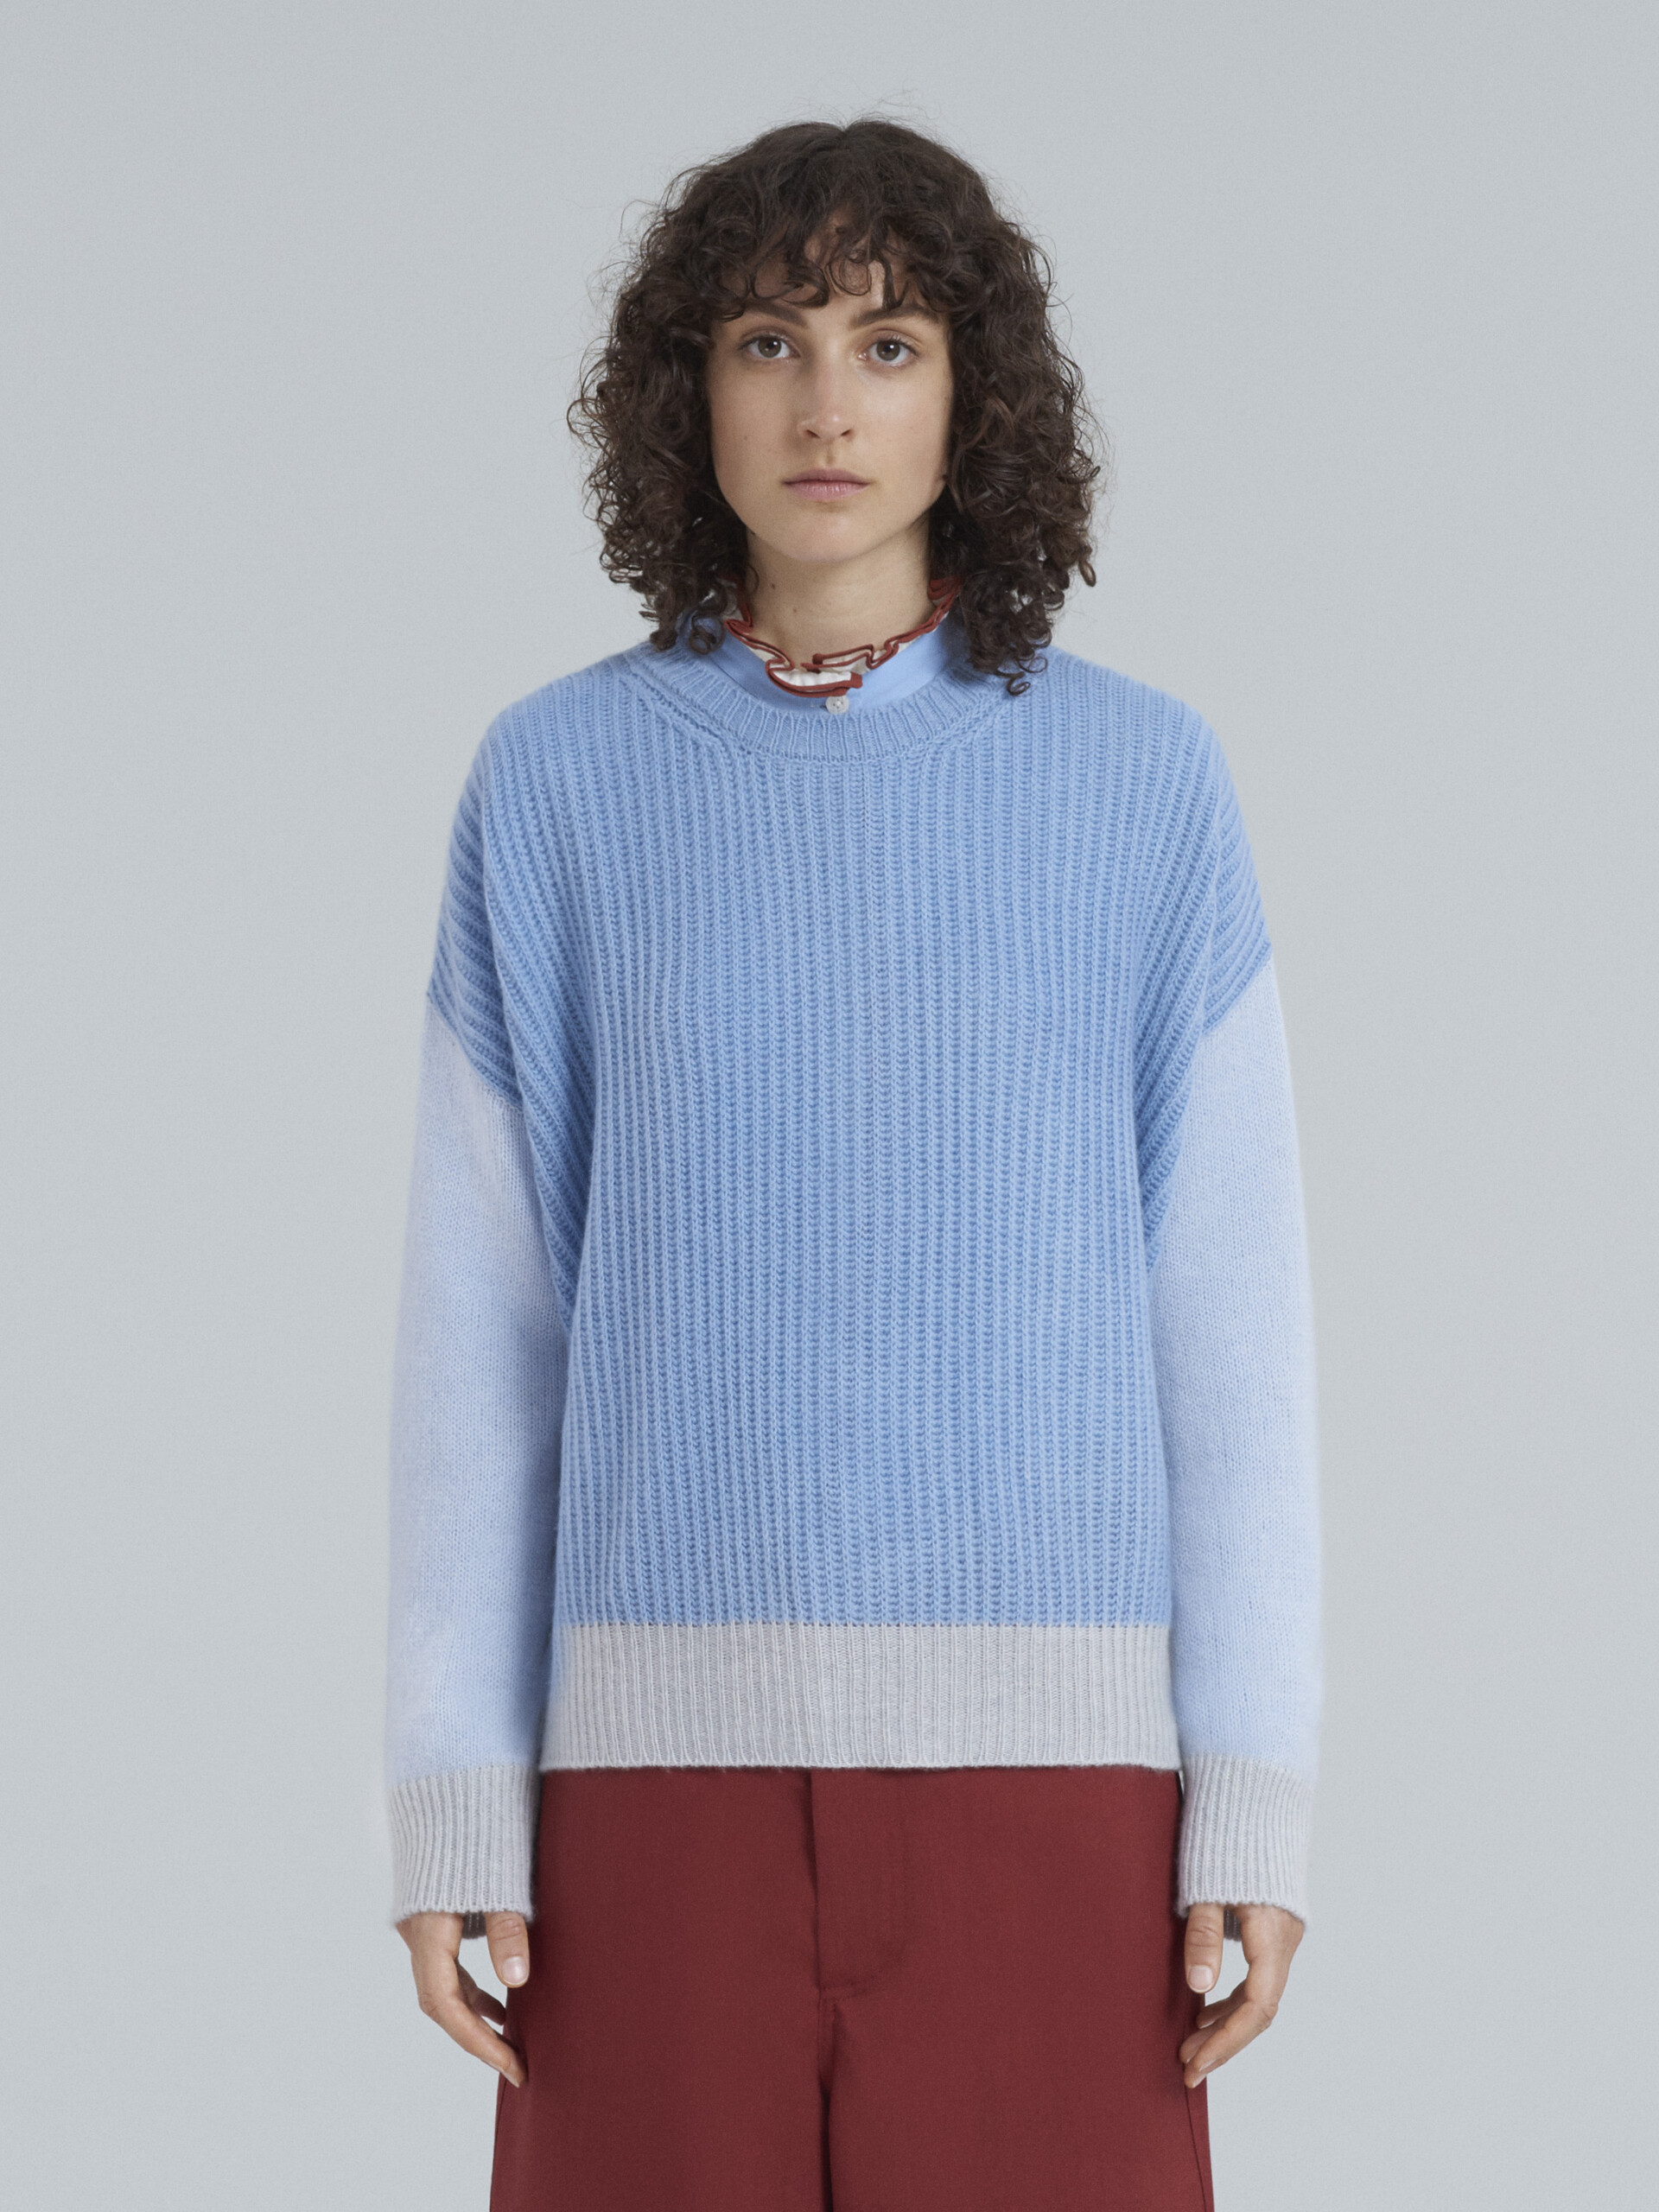 Cashmere sweater with colour-block pattern - Pullovers - Image 2